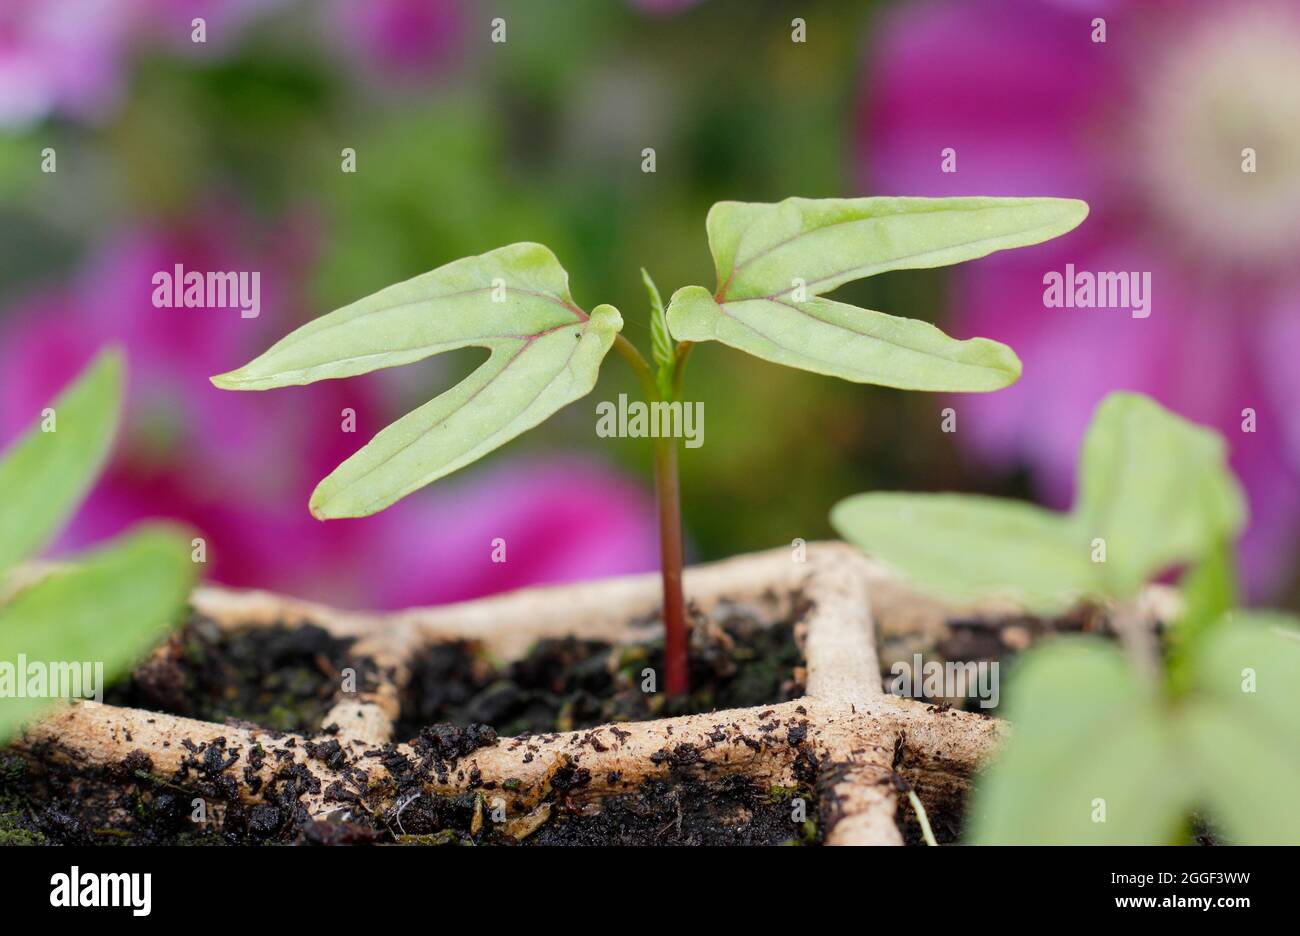 Seedlings of Ipomoea tricolor 'Heavenly Blue' morning glory annual climbing plant in biodegradable starter modules. UK Stock Photo